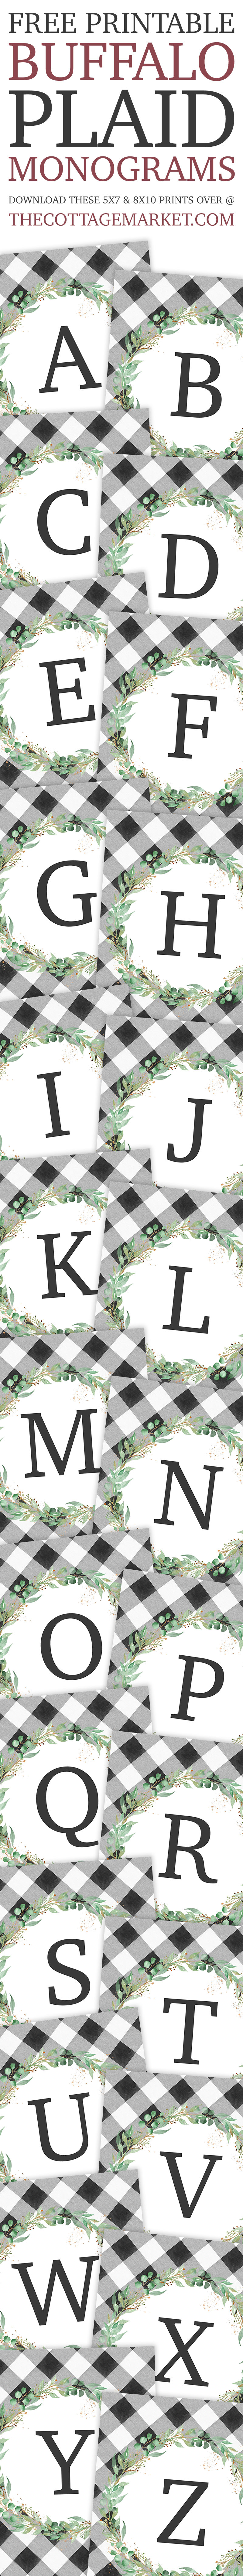 Free Printable Buffalo Plaid Monograms are just waiting for you to create something amazing with!  Maybe frame them? Make a Farmhouse Banner?